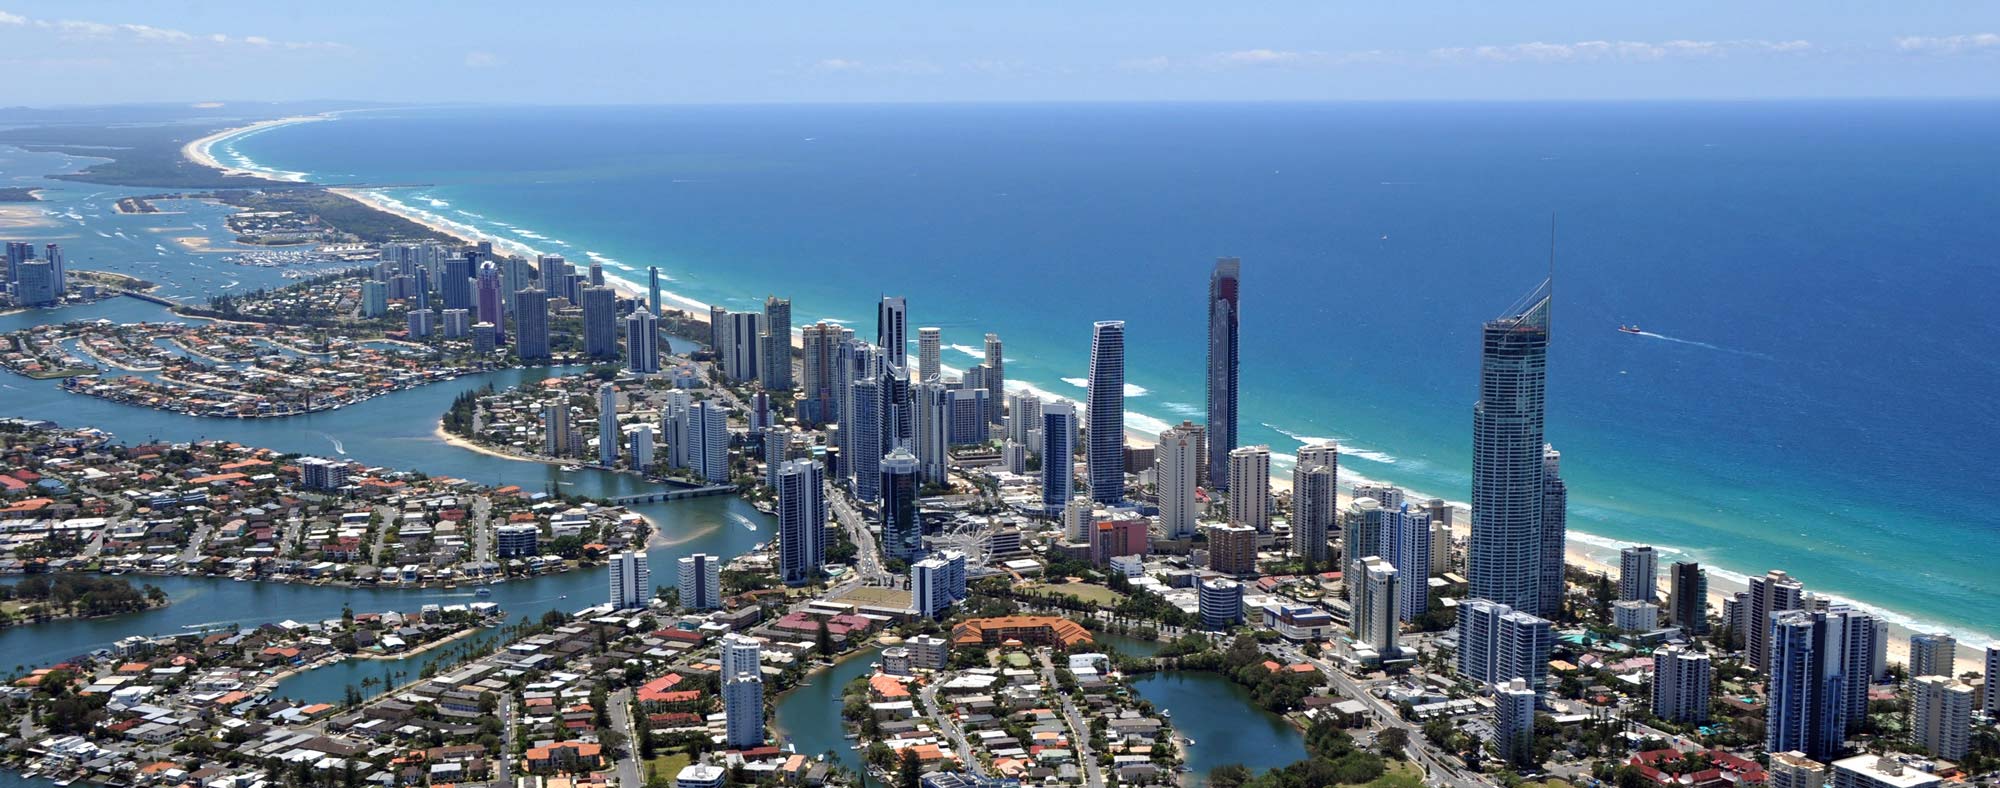 Not surprisingly, Surfers Paradise is the most visited Gold Coast